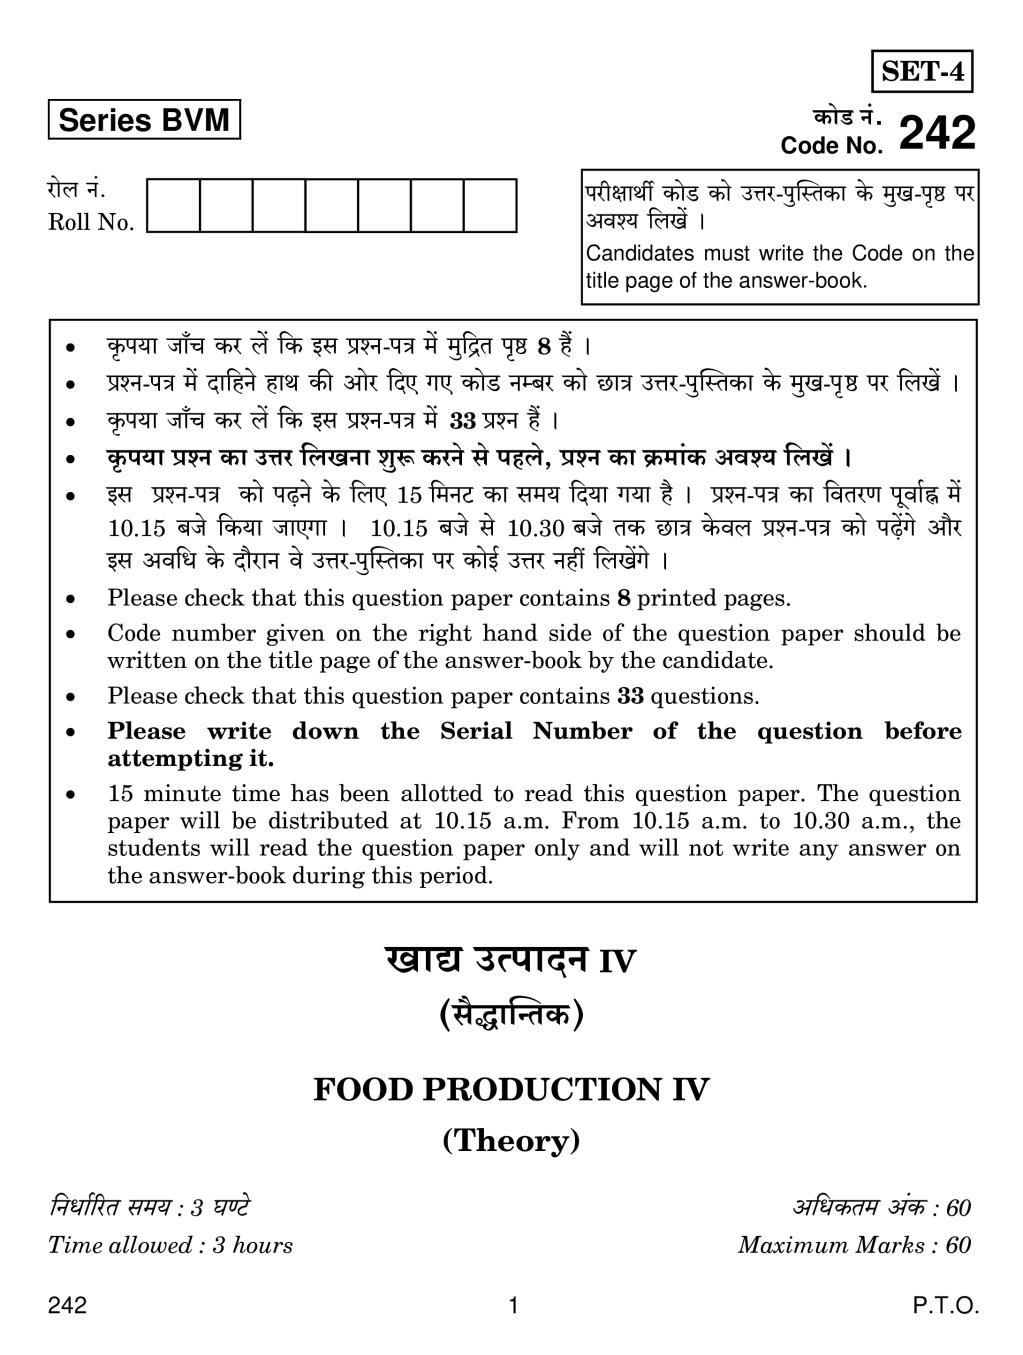 CBSE Class 12 Food Production IV Question Paper 2019 - Page 1